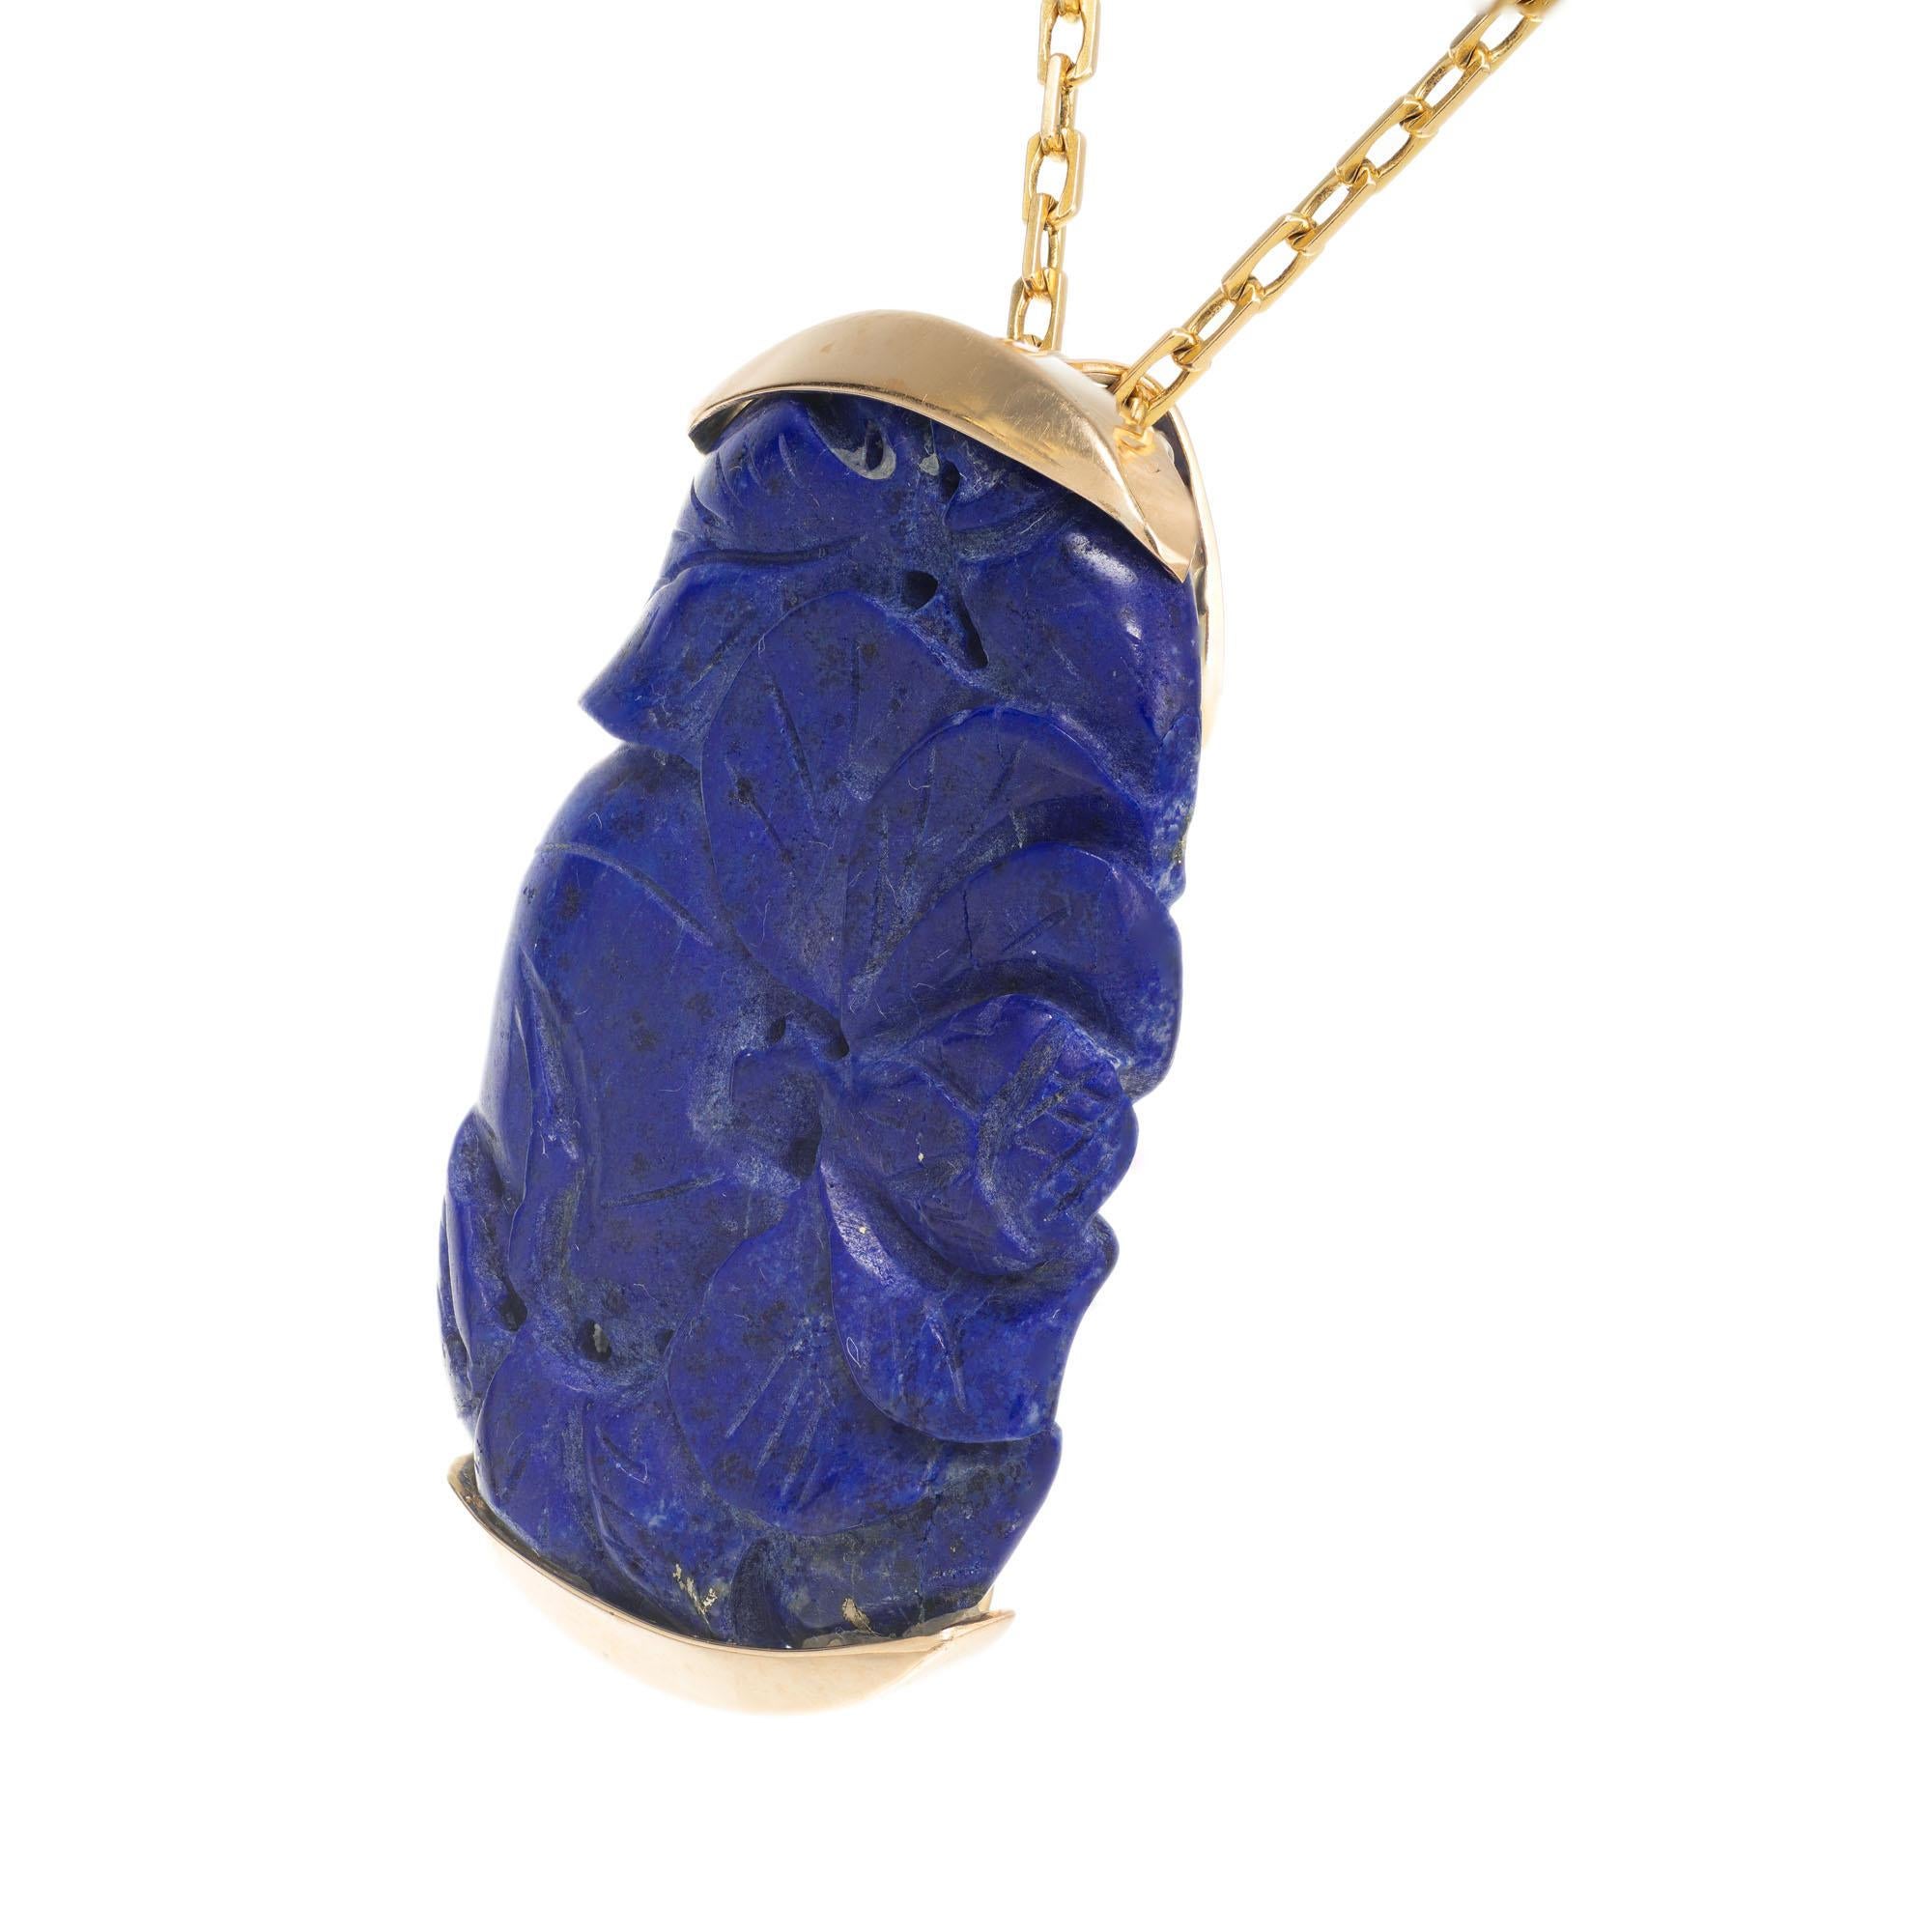 Natural untreated carved lapis pendant in a handmade 14k yellow gold pendant necklace. 16 inch 14k yellow gold chain. 

1 pierced carved blue lapis GIA Certificate # 1182072083
14k yellow gold 
Stamped: not
Chain: 14k yellow gold 16 inch
14.9